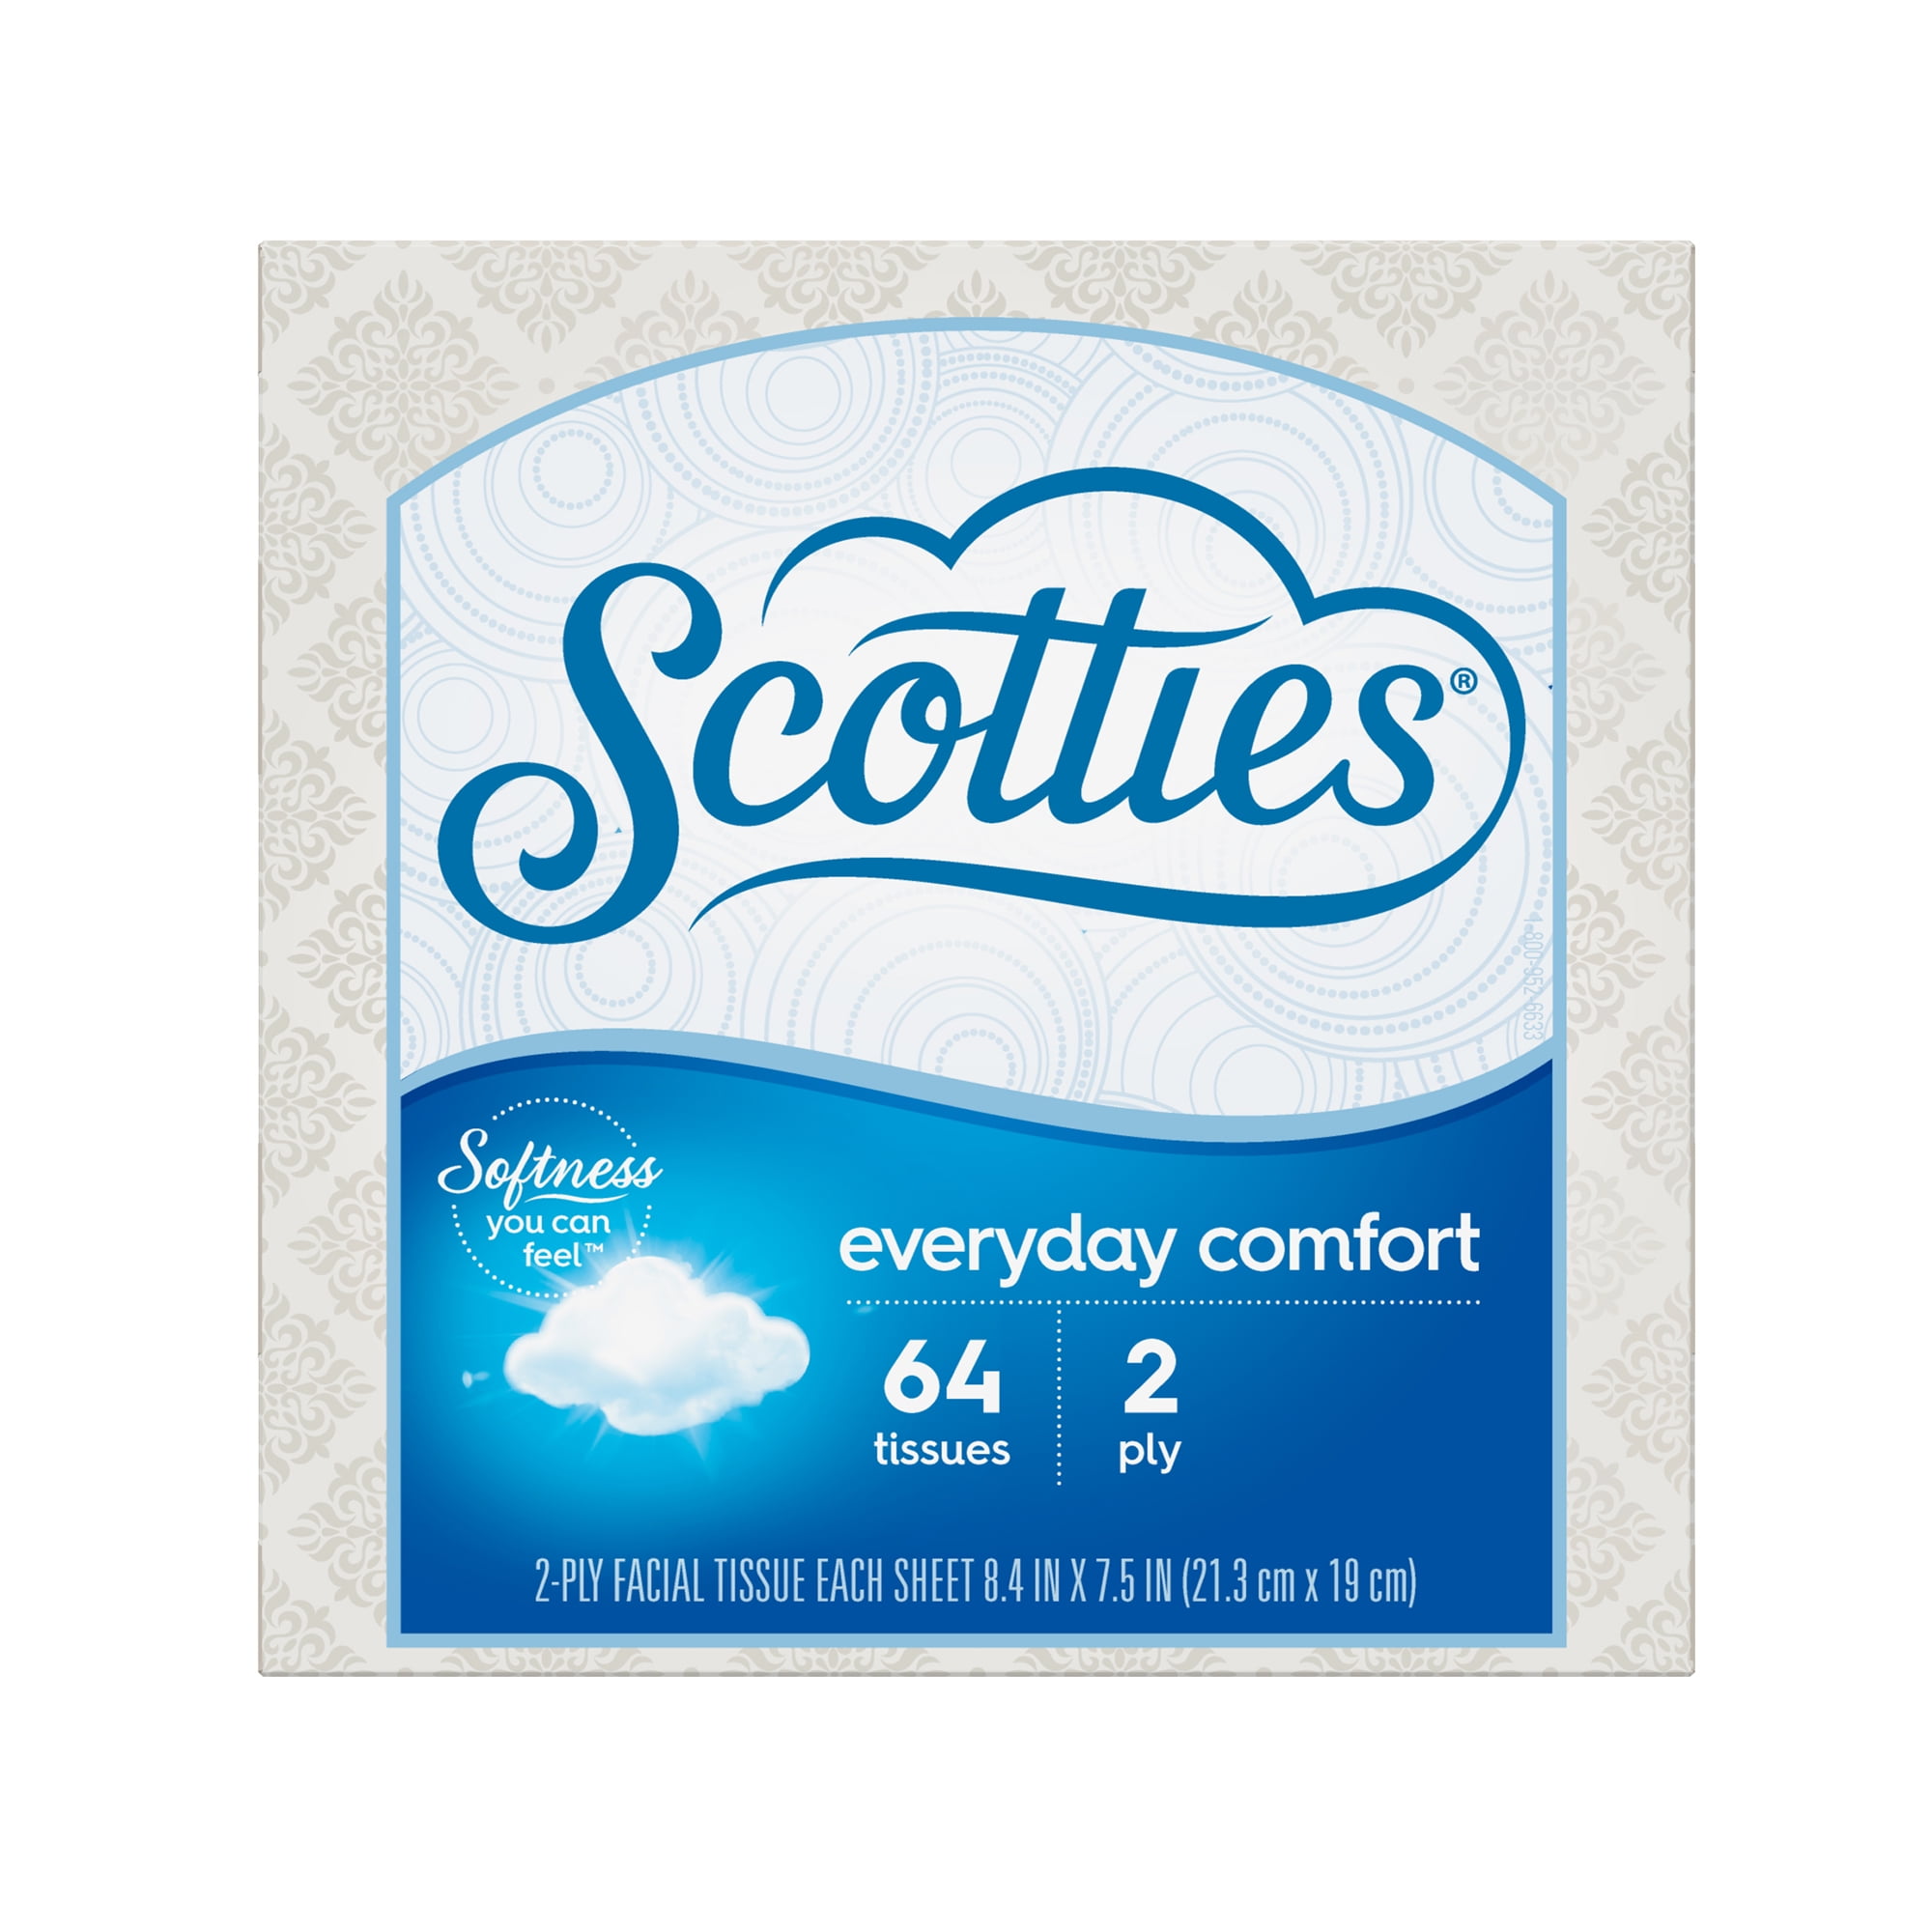 Scotties Everyday Comfort 2-Ply Facial Tissue, 64 Sheets